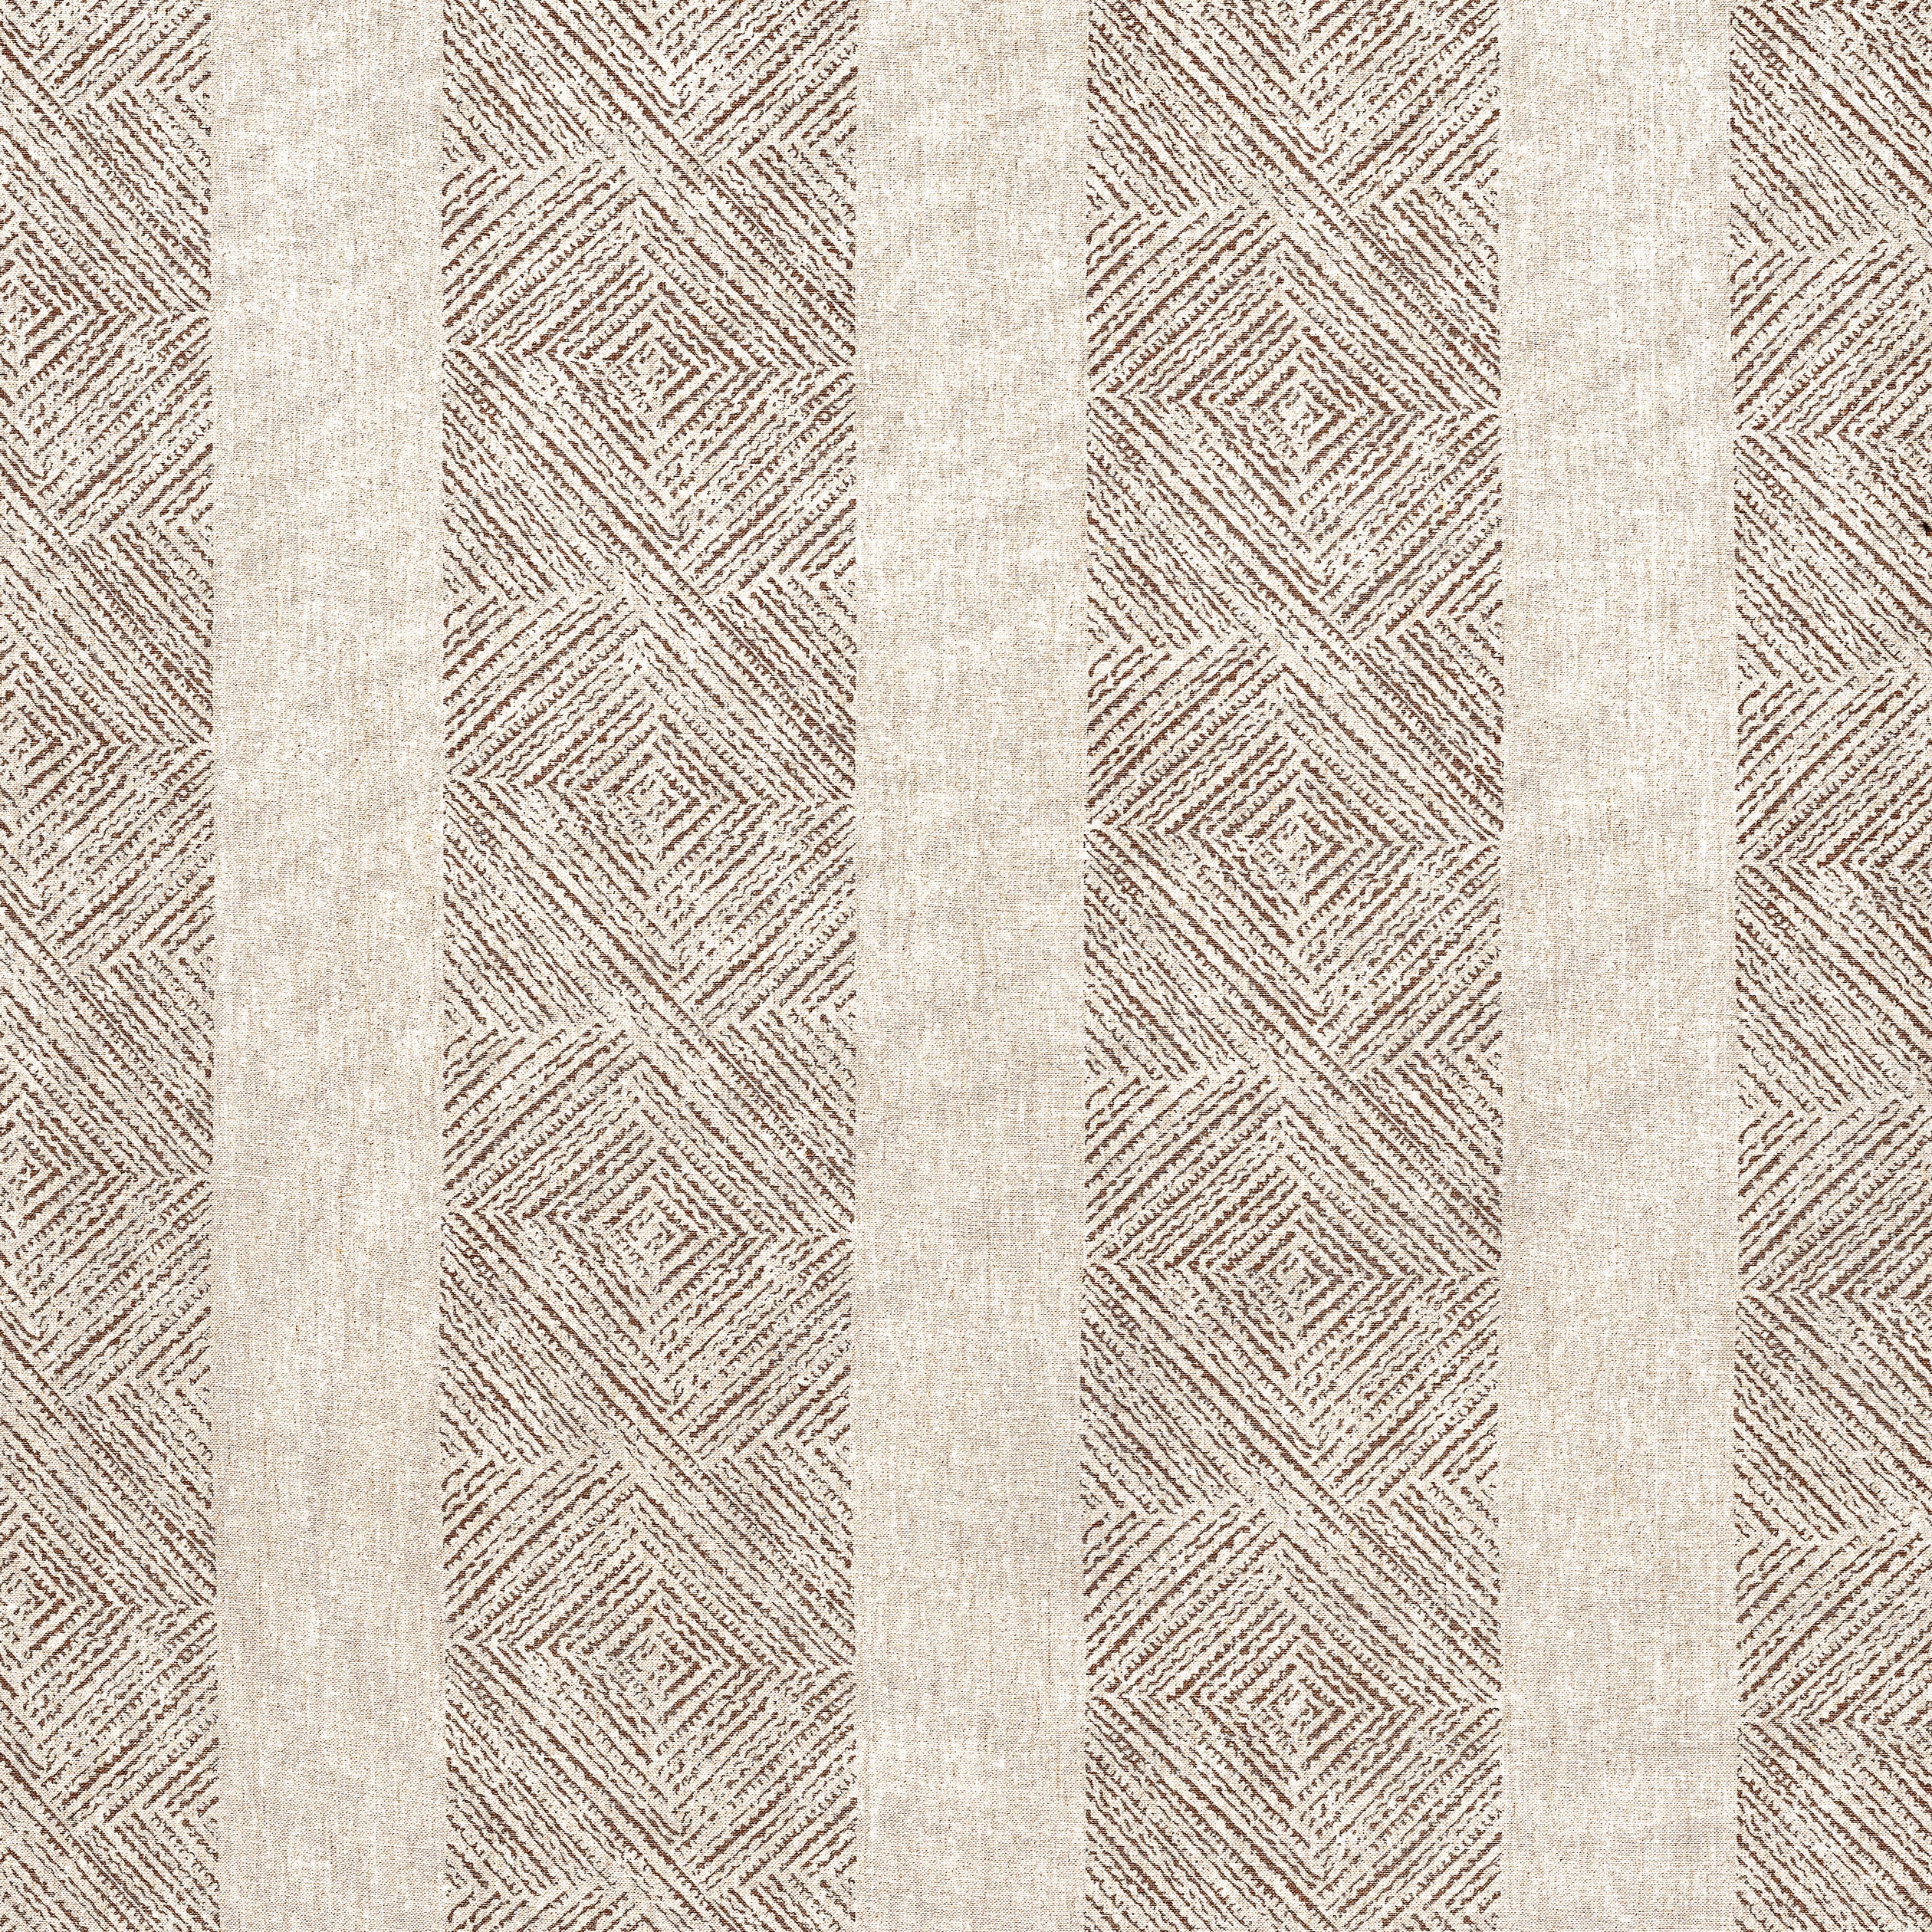 Clipperton Stripe fabric in brown on natural color - pattern number AF15130 - by Anna French in the Antilles collection